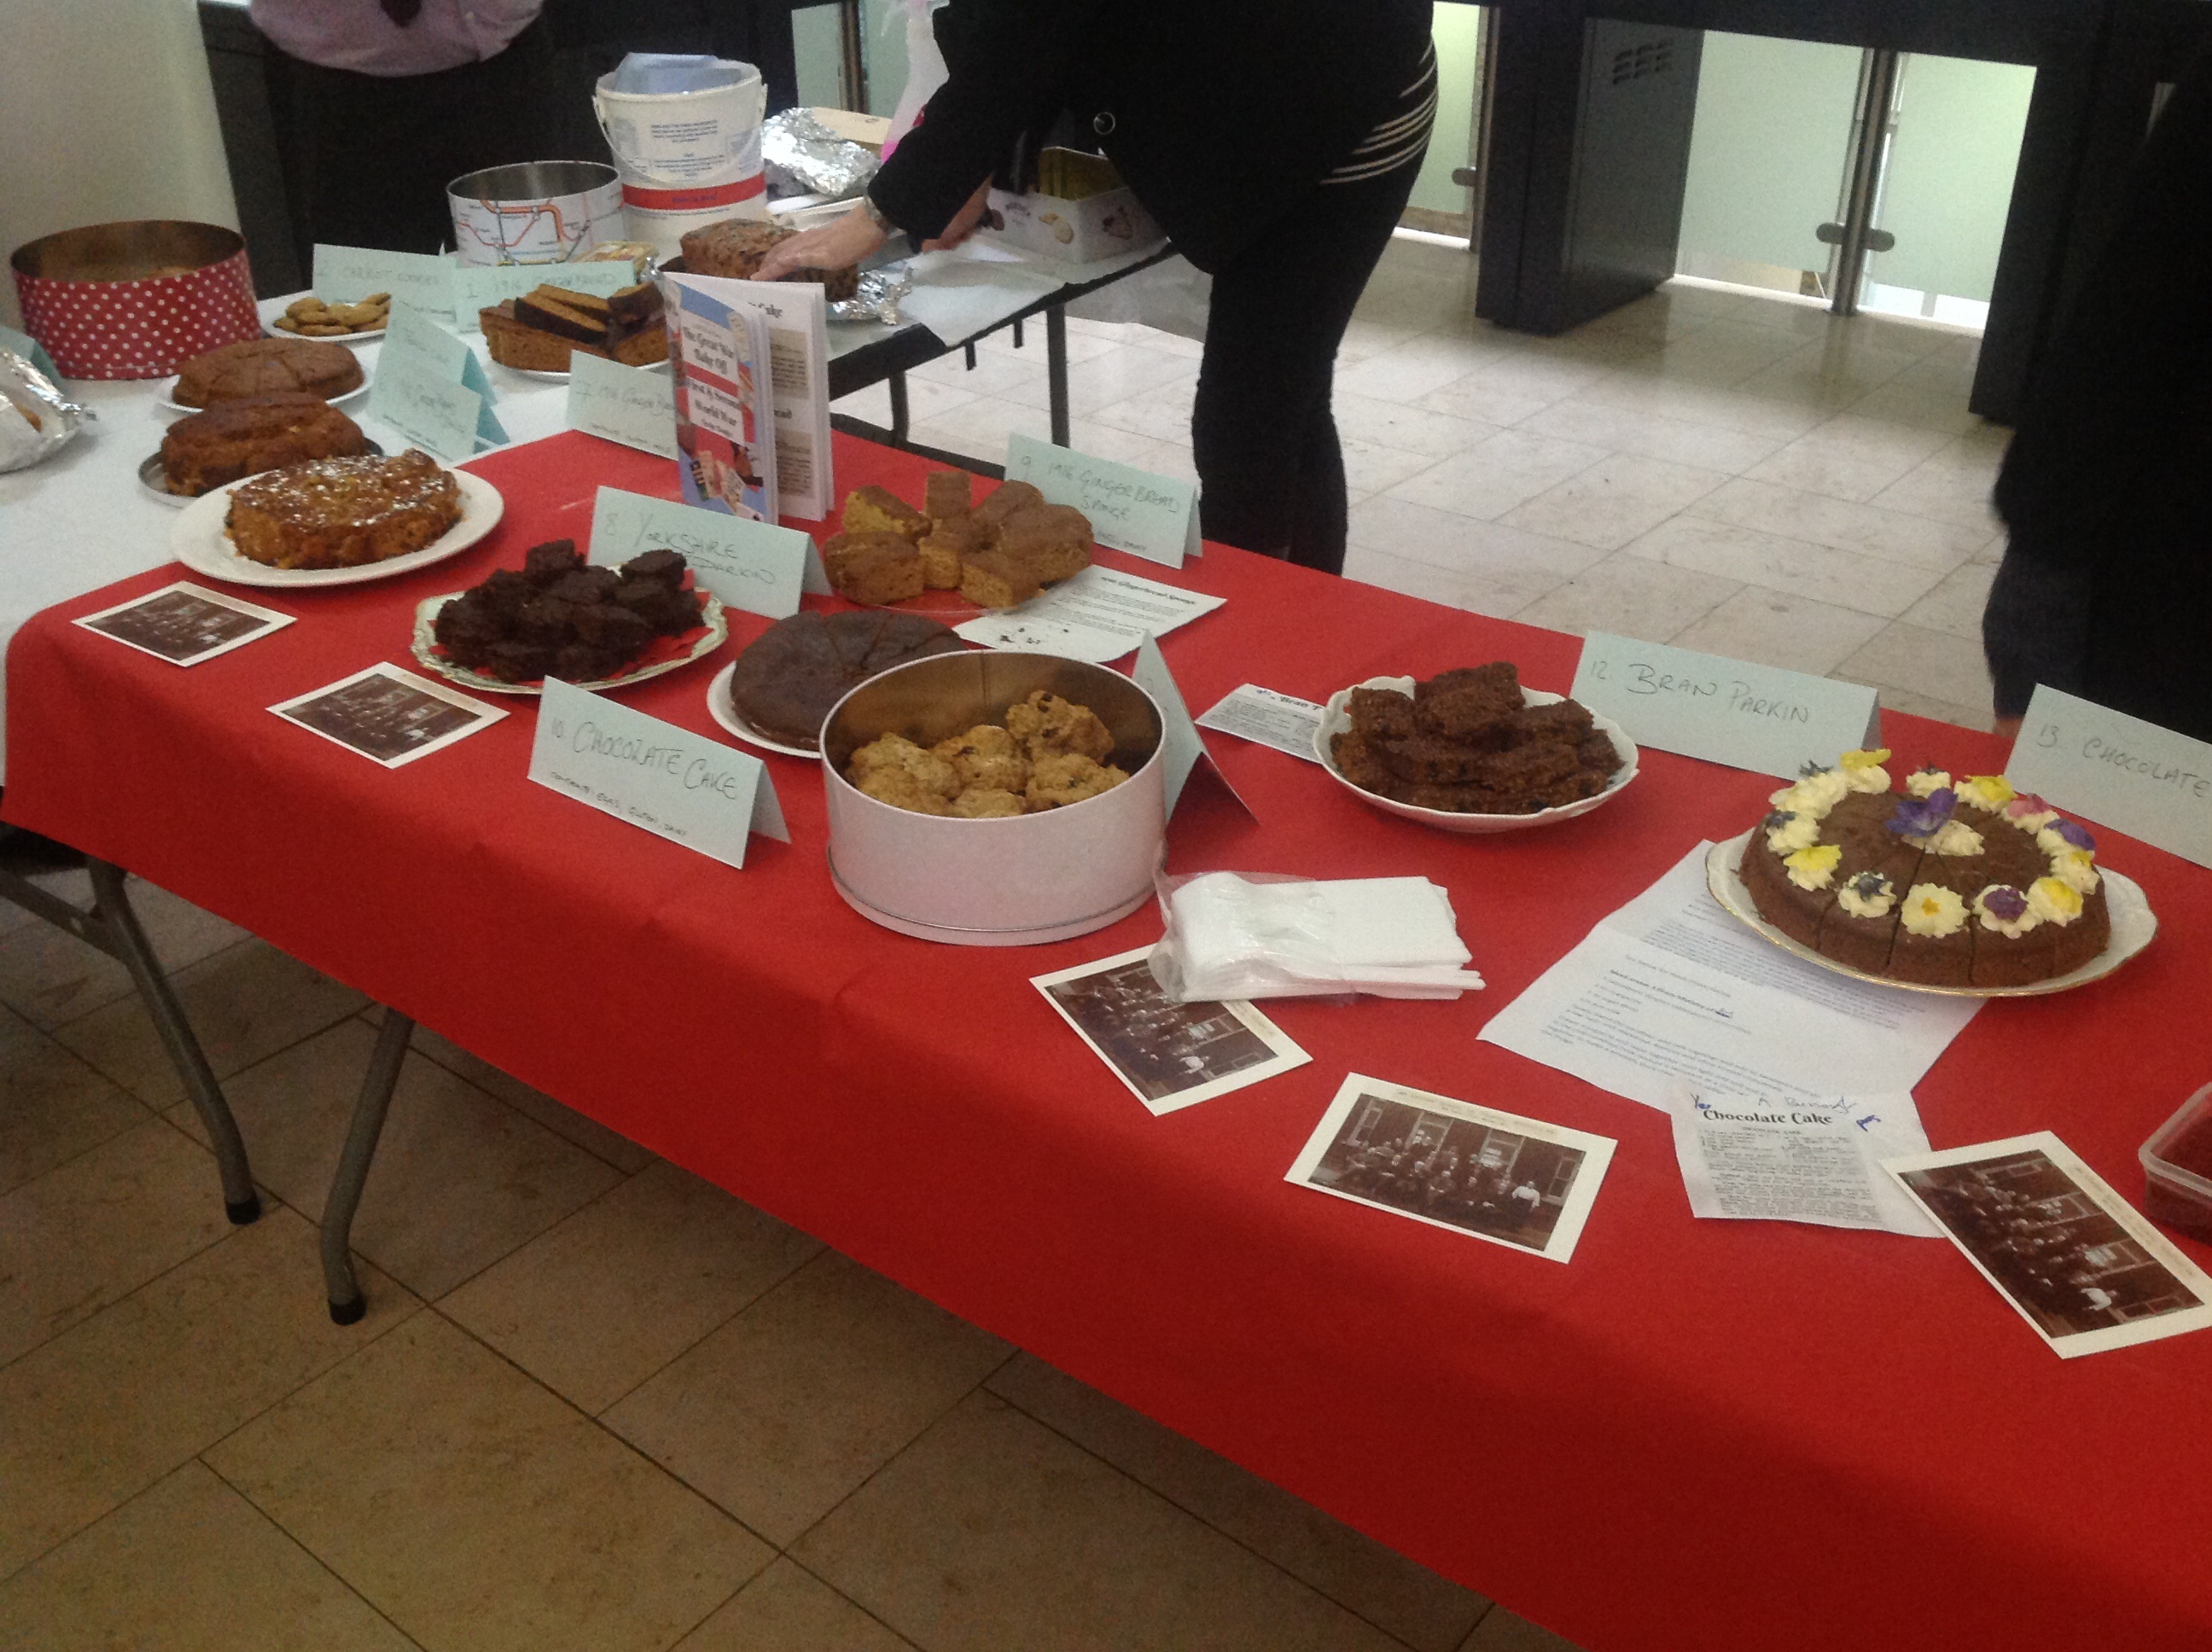 Selection of entries cakes